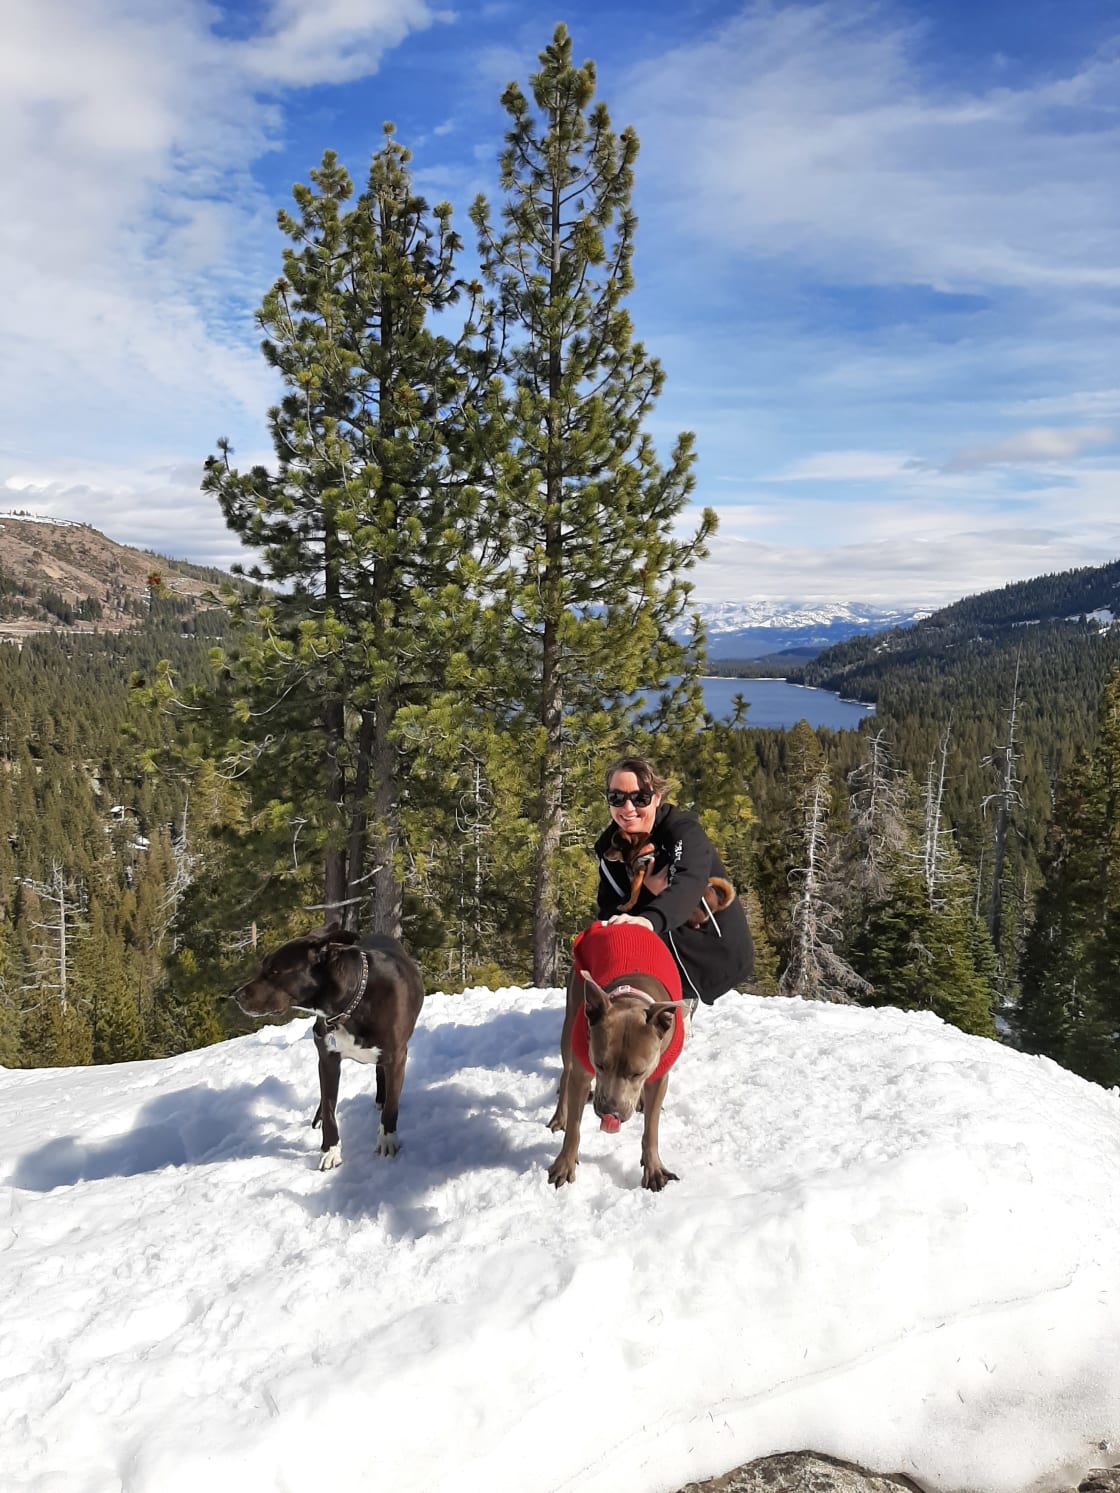 Short drive up Hwy 20 to snowshoe Donner Pass route.